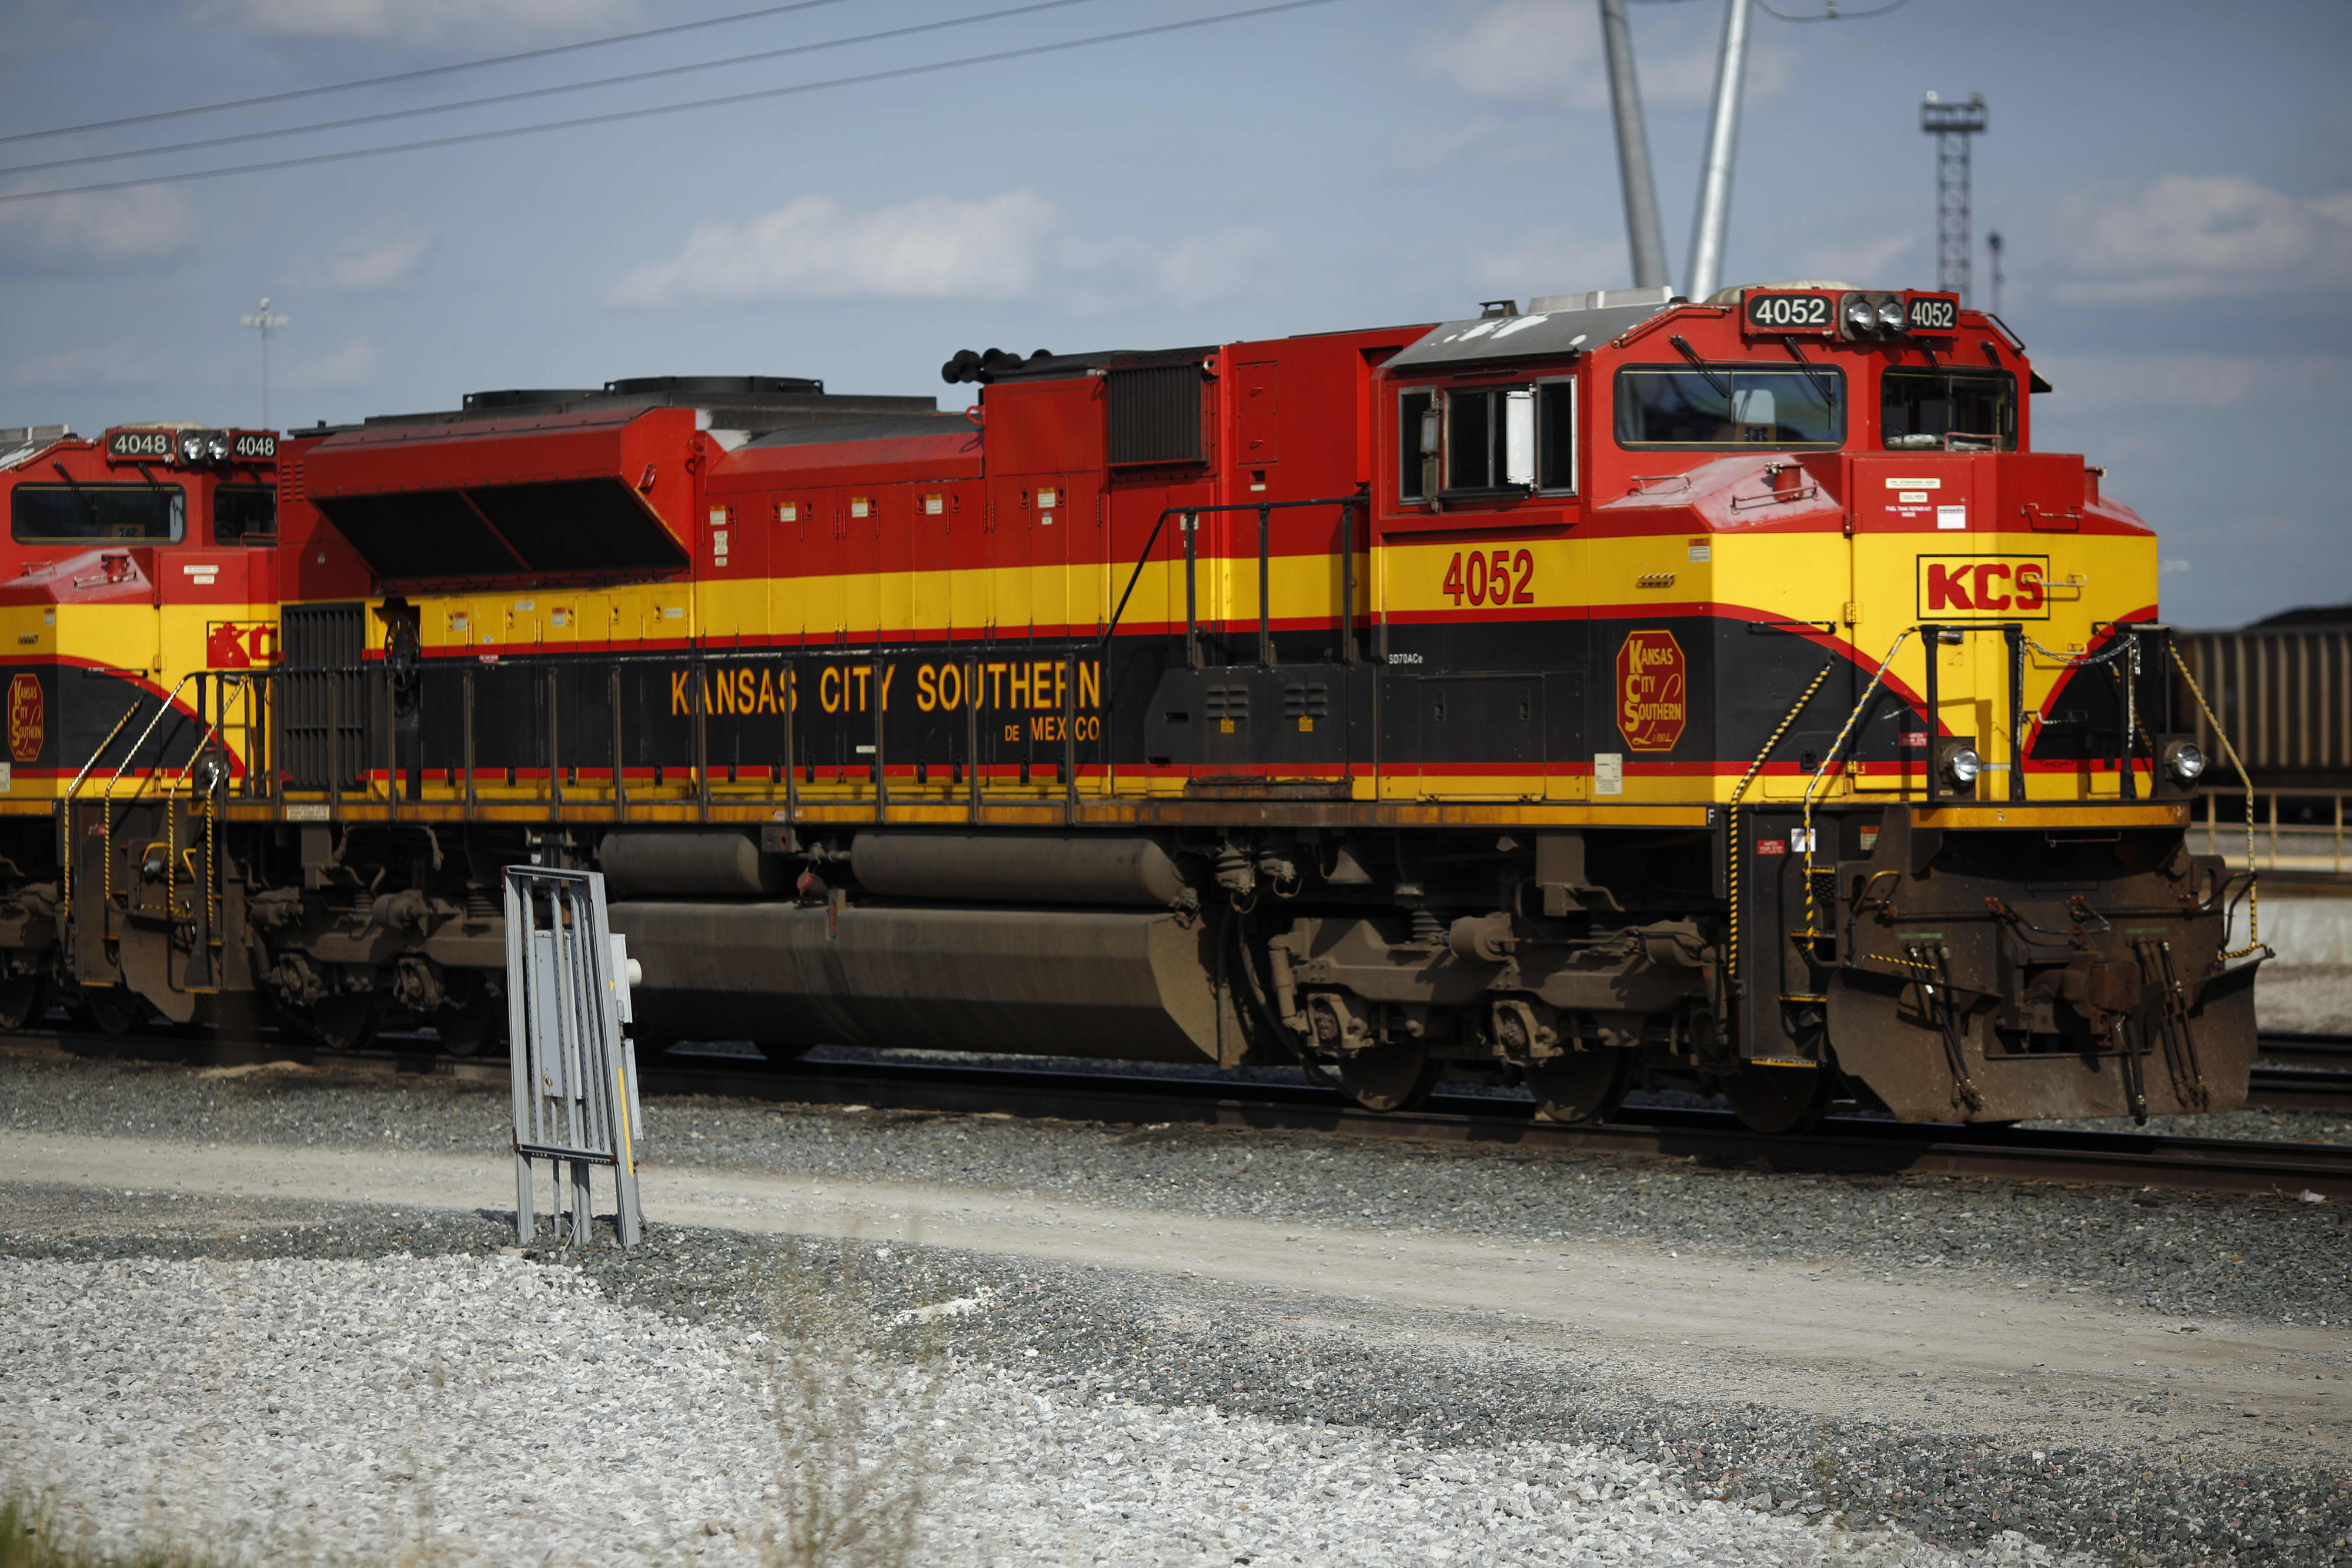 Canadian National launches battle for Kansas City rail with $30 bln plus bid